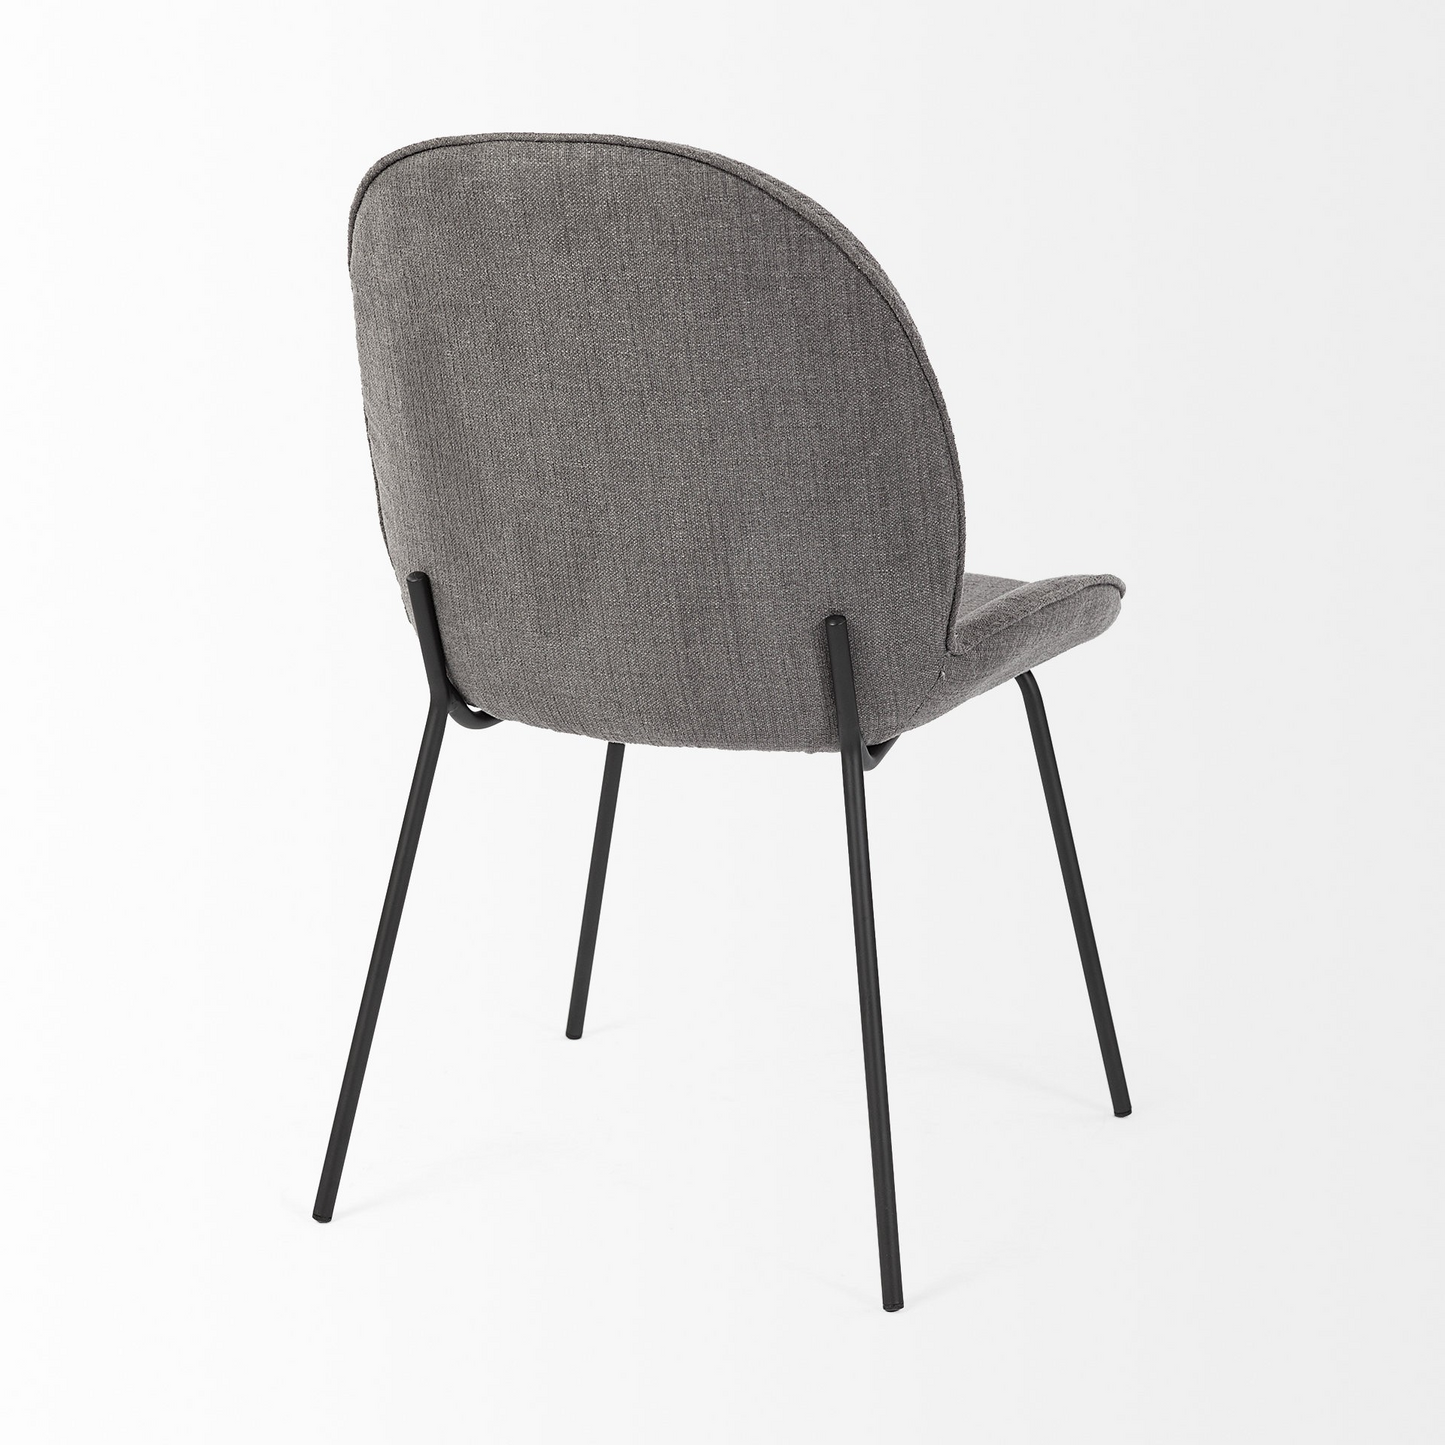 "Set Of Two Gray And Black Upholstered Fabric Side Chairs"